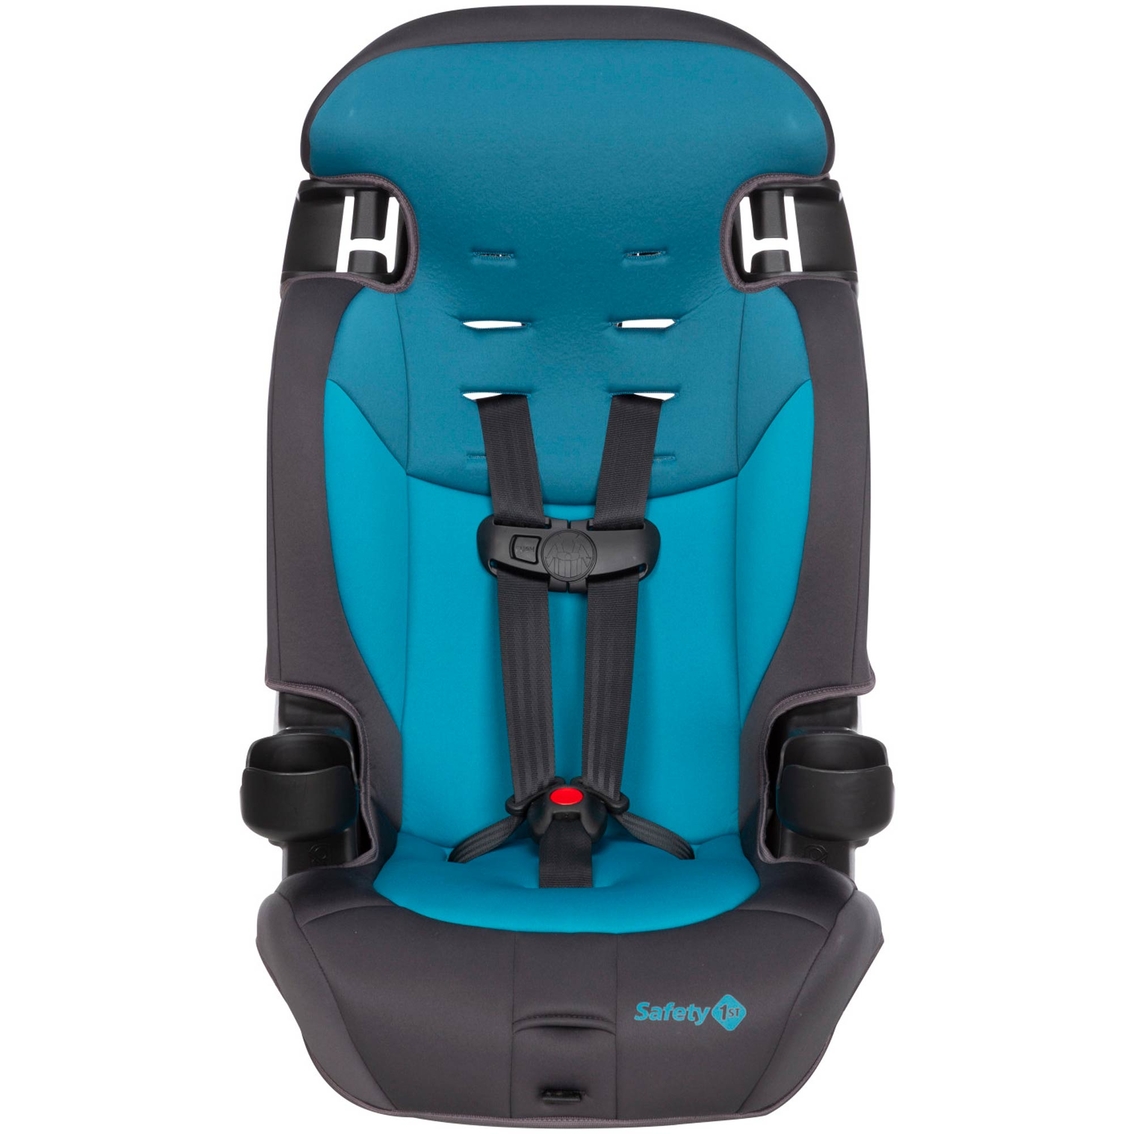 Safety 1st Grand 2 in 1 Booster Car Seat - Image 7 of 9